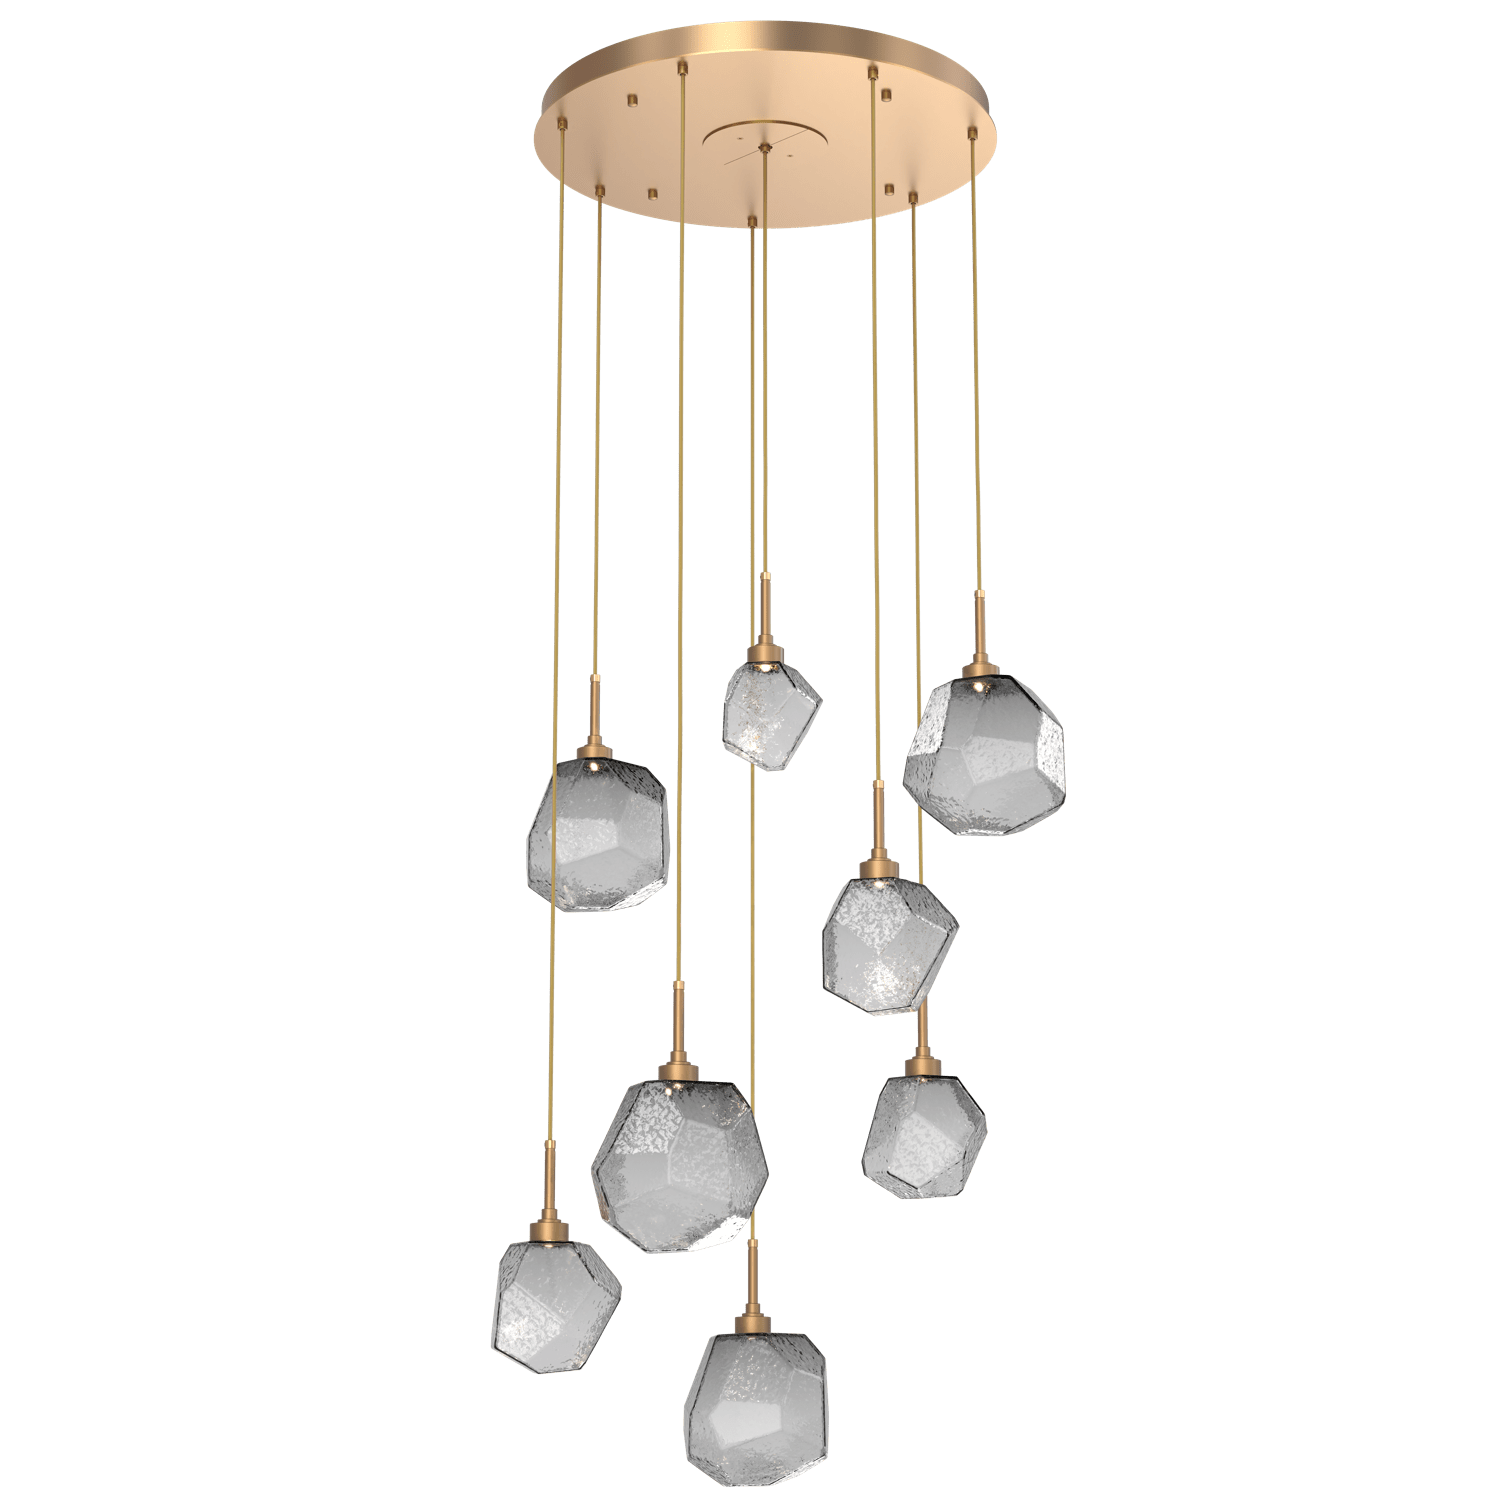 CHB0039-08-NB-S-Hammerton-Studio-Gem-8-light-round-pendant-chandelier-with-novel-brass-finish-and-smoke-blown-glass-shades-and-LED-lamping